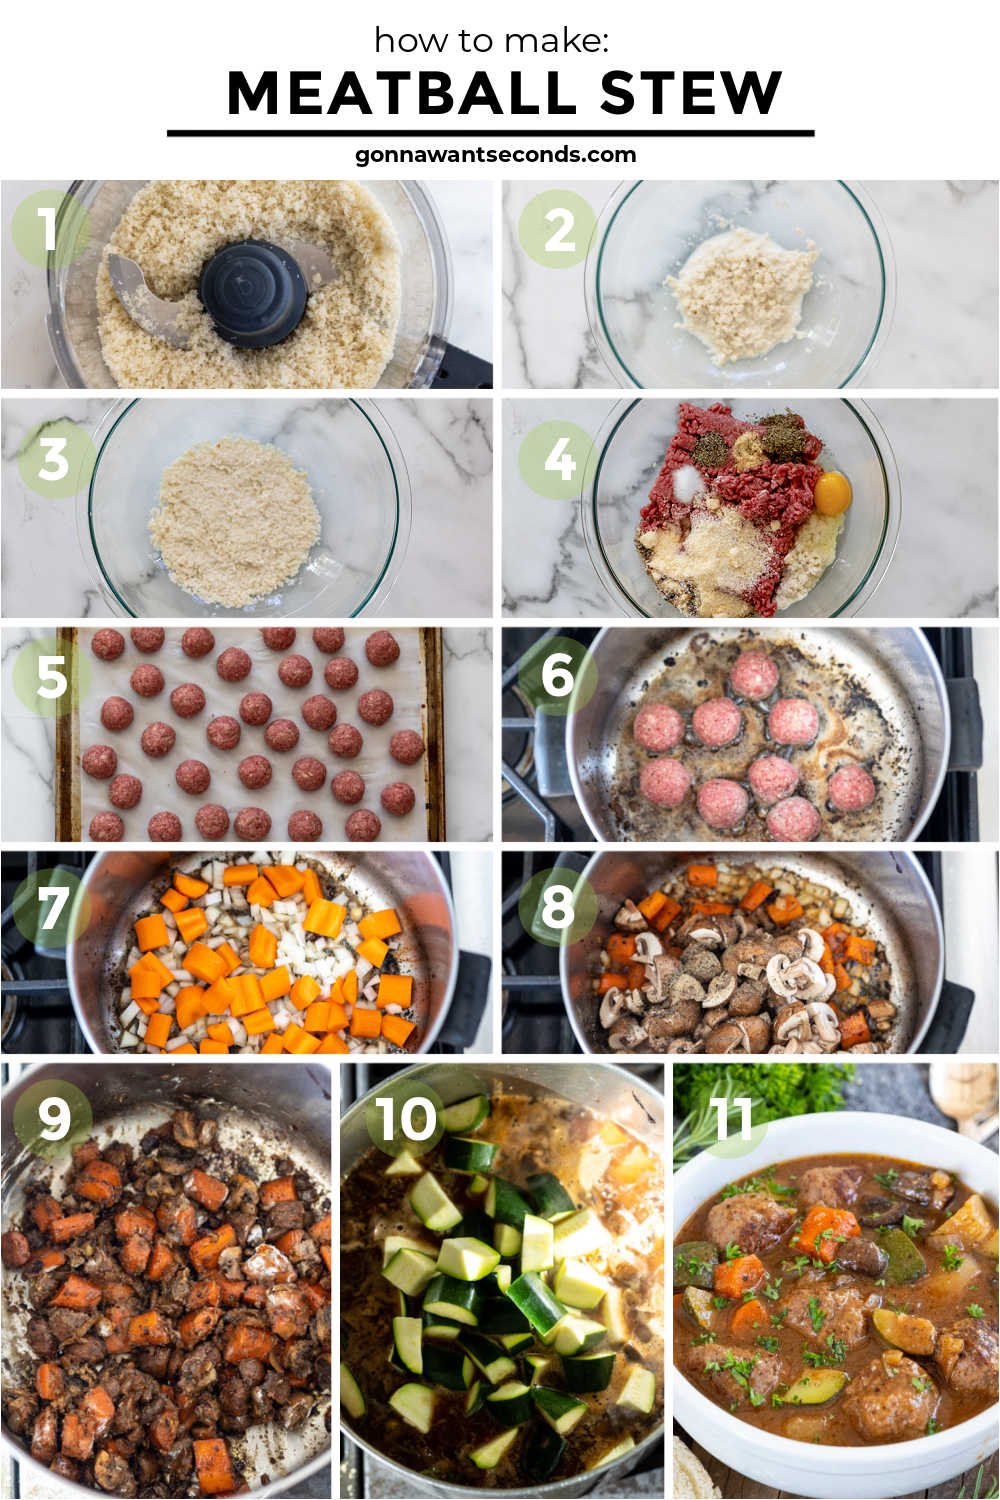 step by step how to make meatball stew